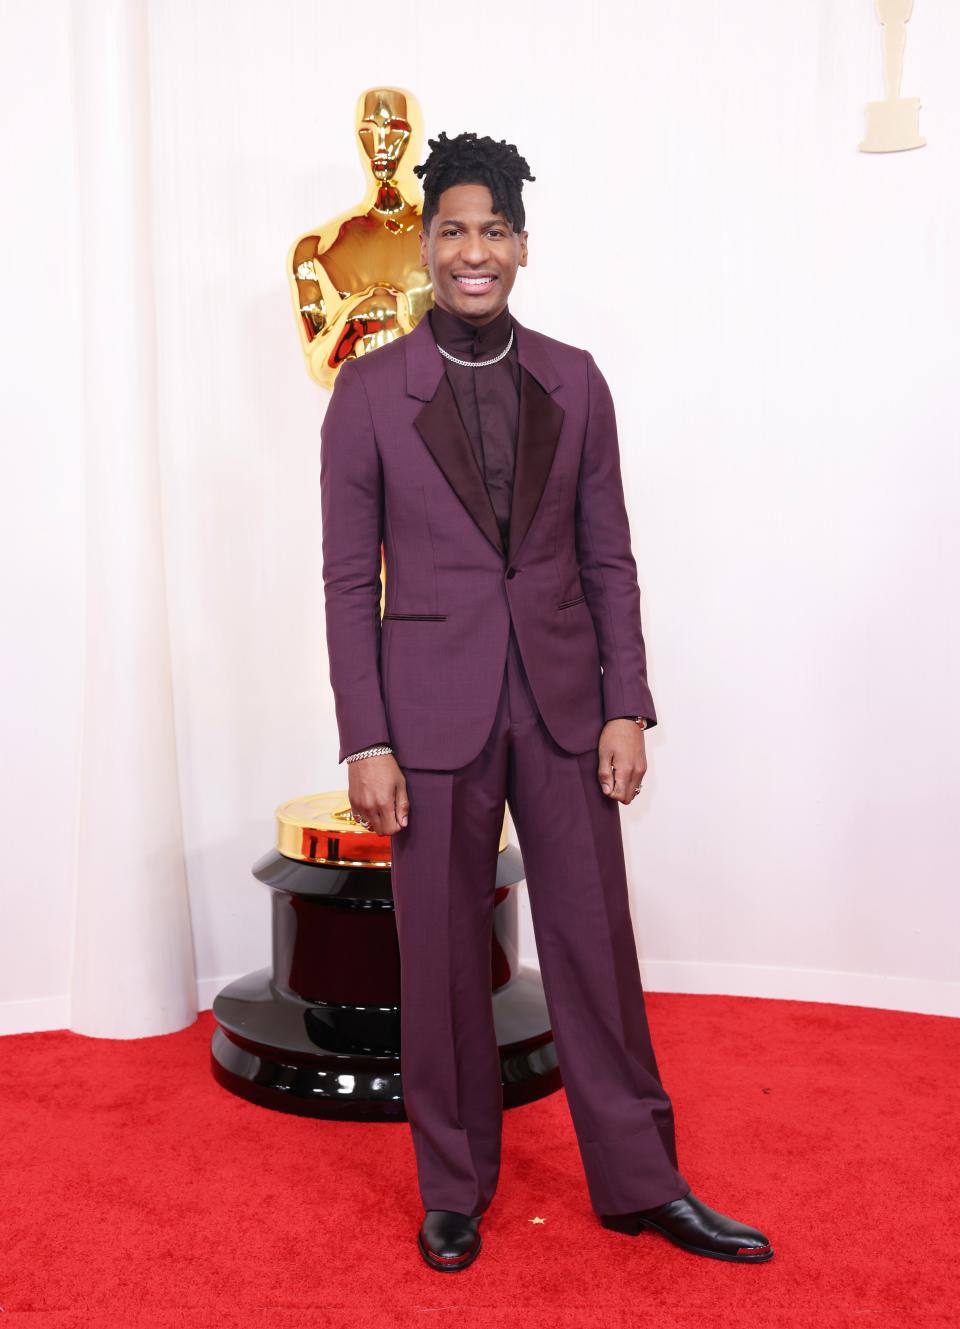 Image may contain: Jon Batiste, Person, Standing, Clothing, Formal Wear, Suit, Adult, Fashion, Footwear, Shoe, and Coat